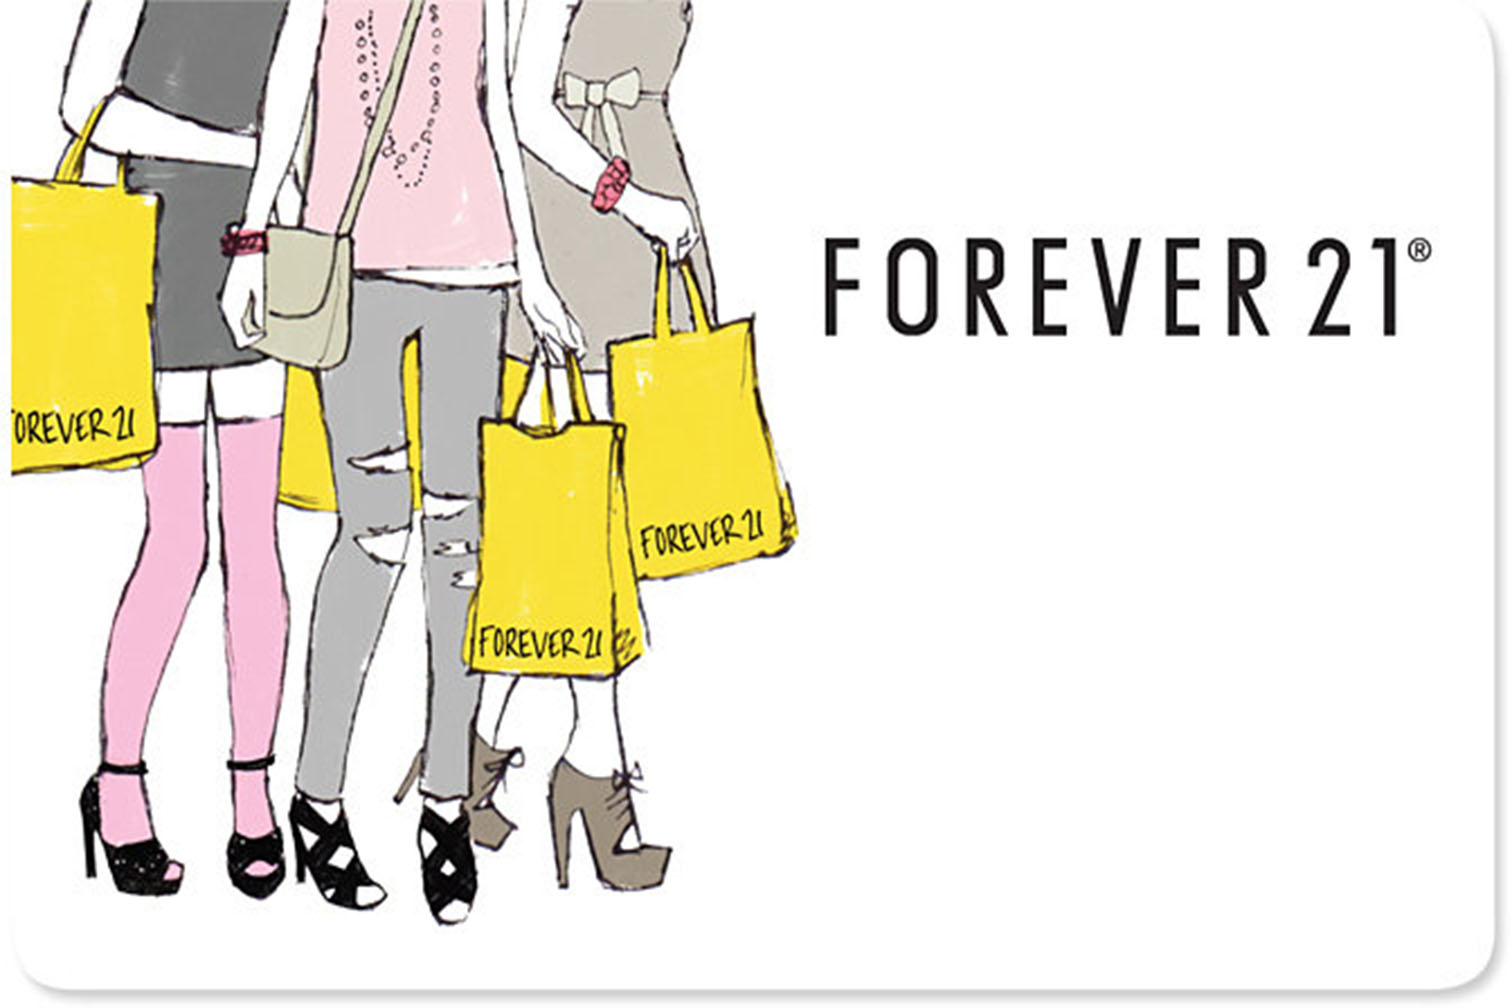 Exciting News â€“ International 50 Forever 21 Gift Card Giveaway!!!